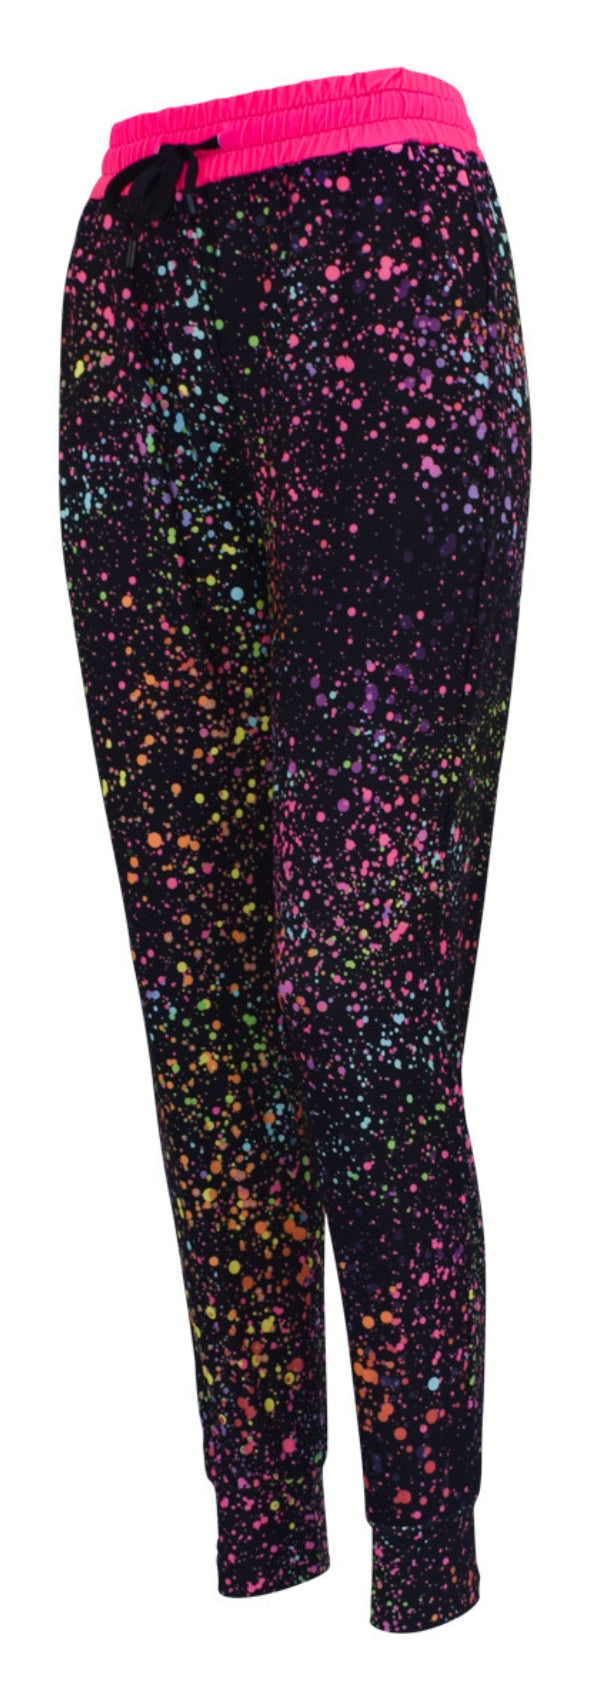 Pink Galaxy Lejoggers-Joggers